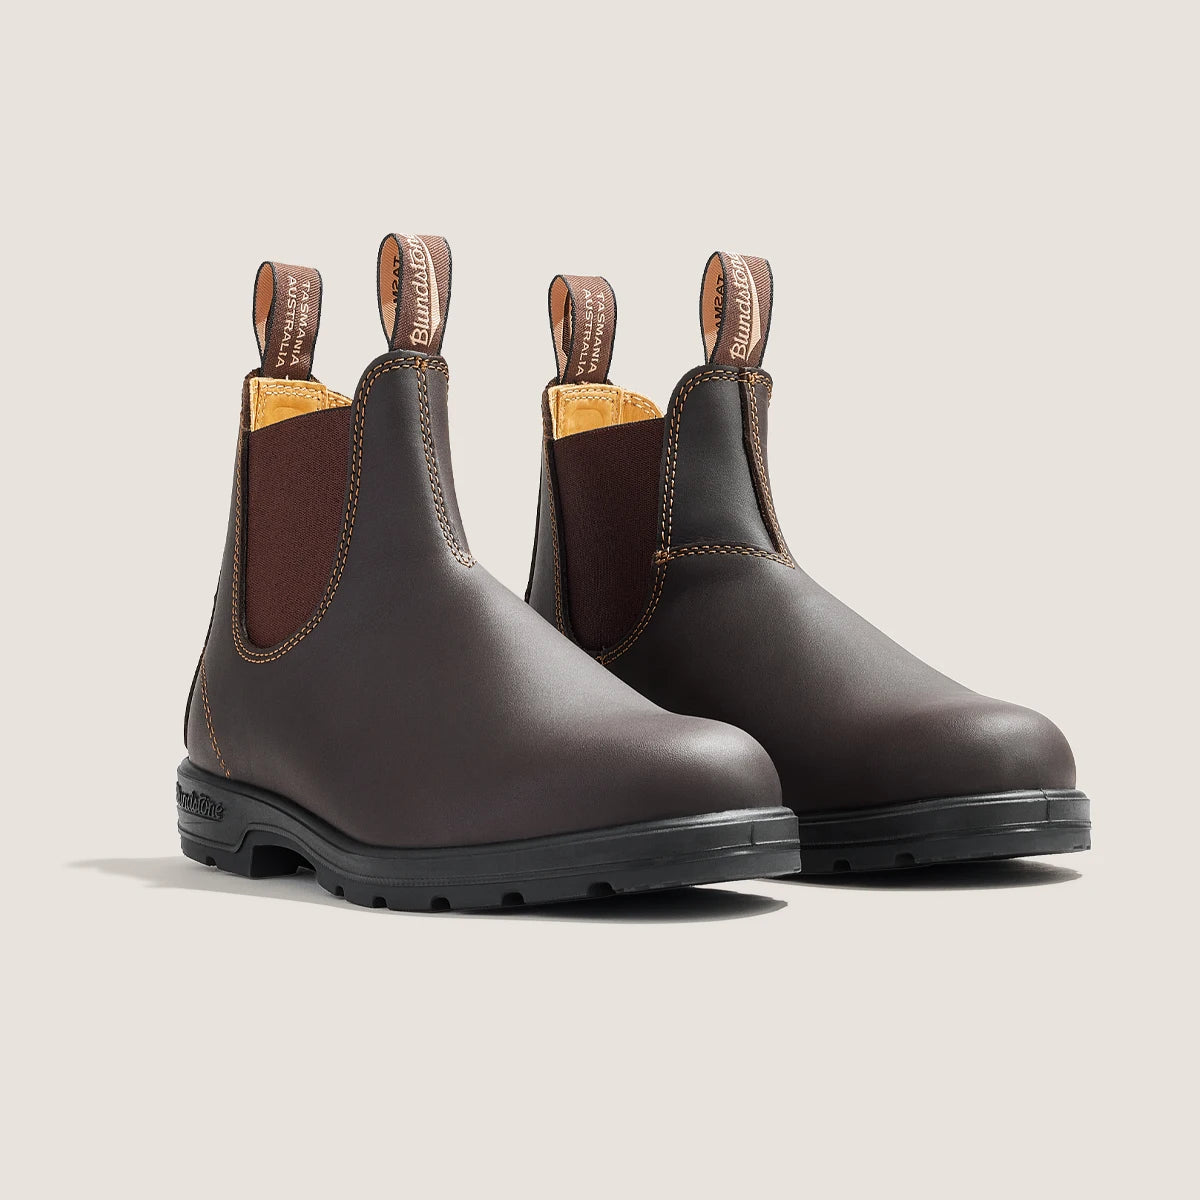 Blundstone 550 ブーツ色…チェスナット